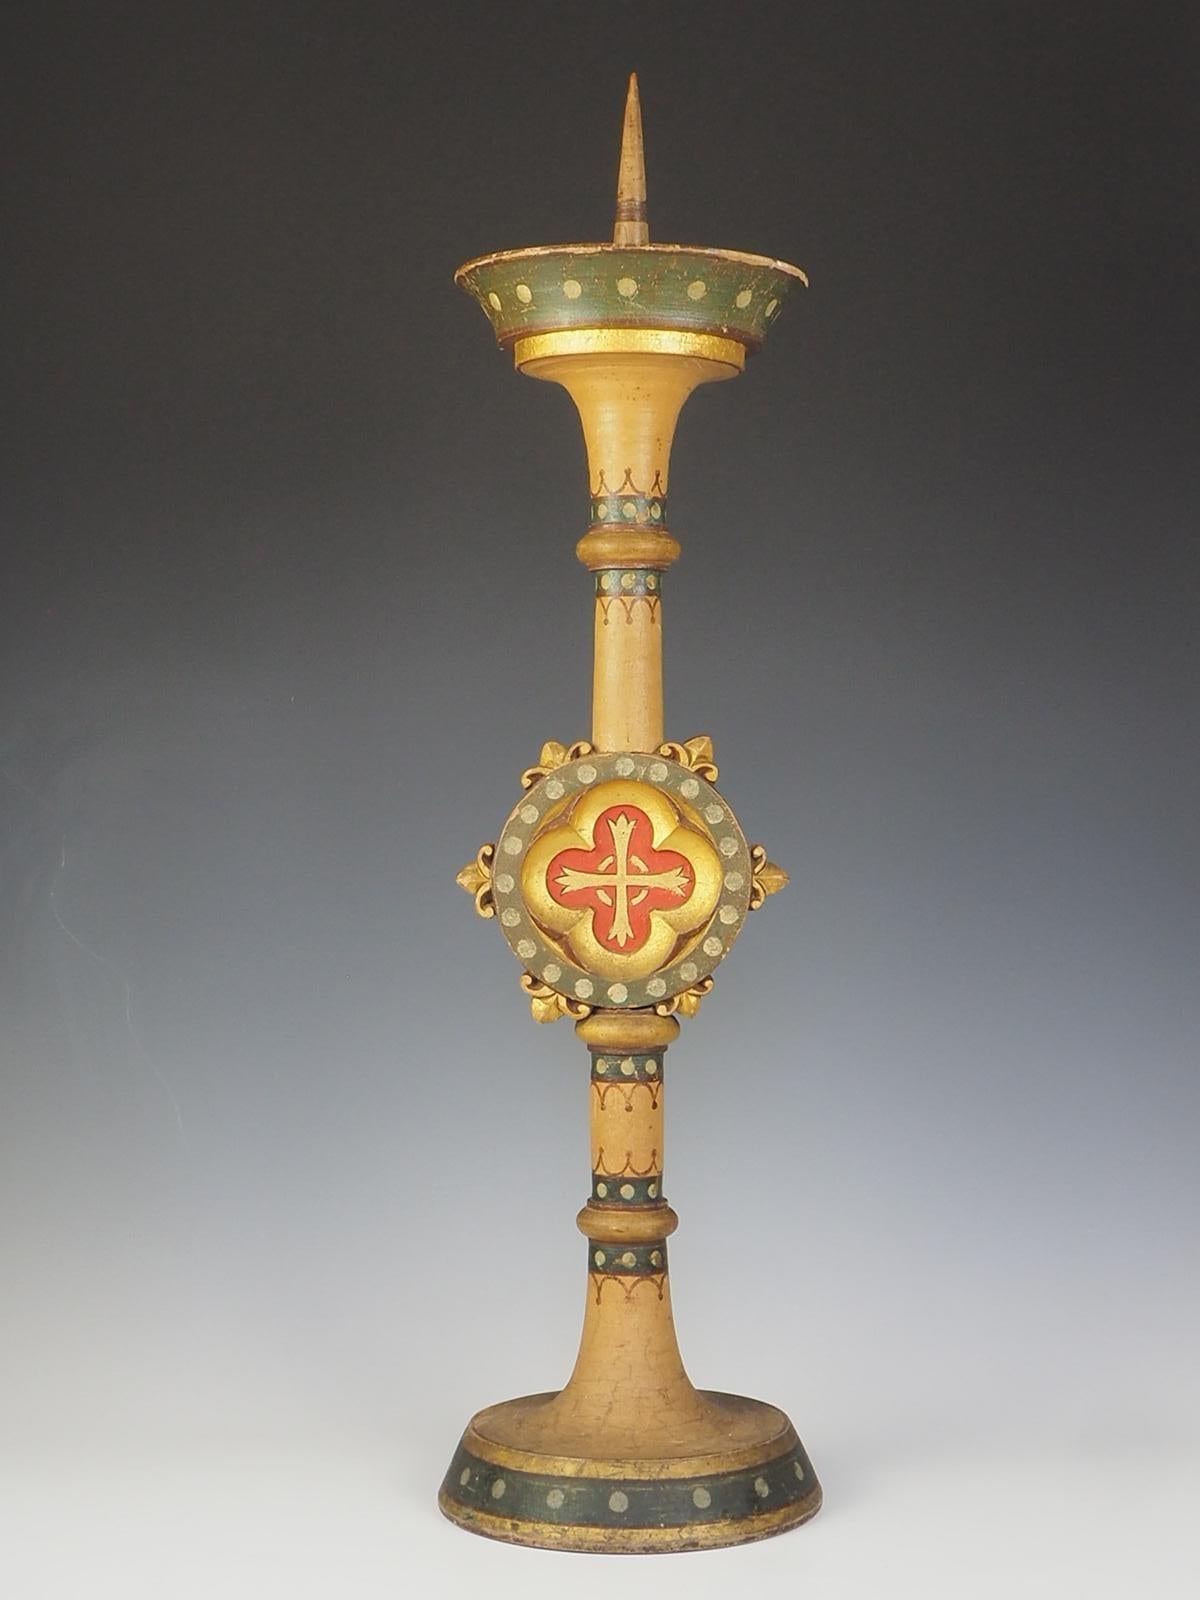 Description

Large Gothic Revival Polychrome and Giltwood Altar Candlestick

Condition
Good condition for age

Measurement

Height:   80 cm   /   31 inches

Width:   31 cm   /  8 inches

2 k.g